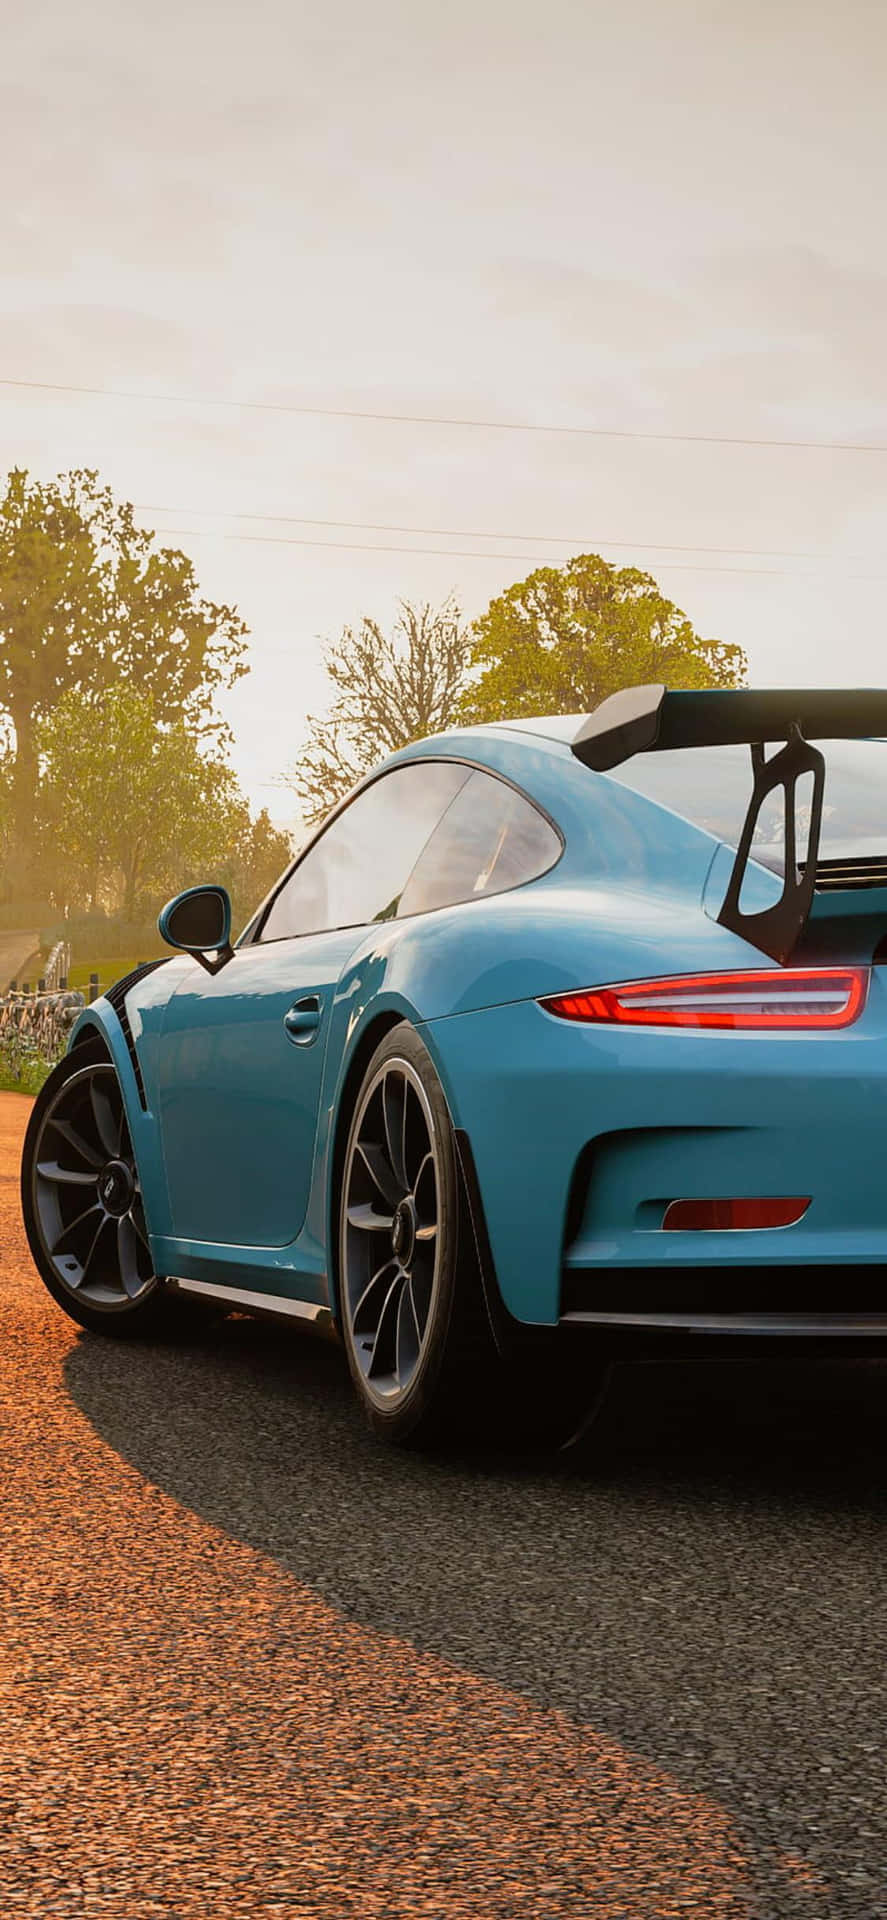 Explore the World in Style With iPhone Xs&Forza Horizon 4